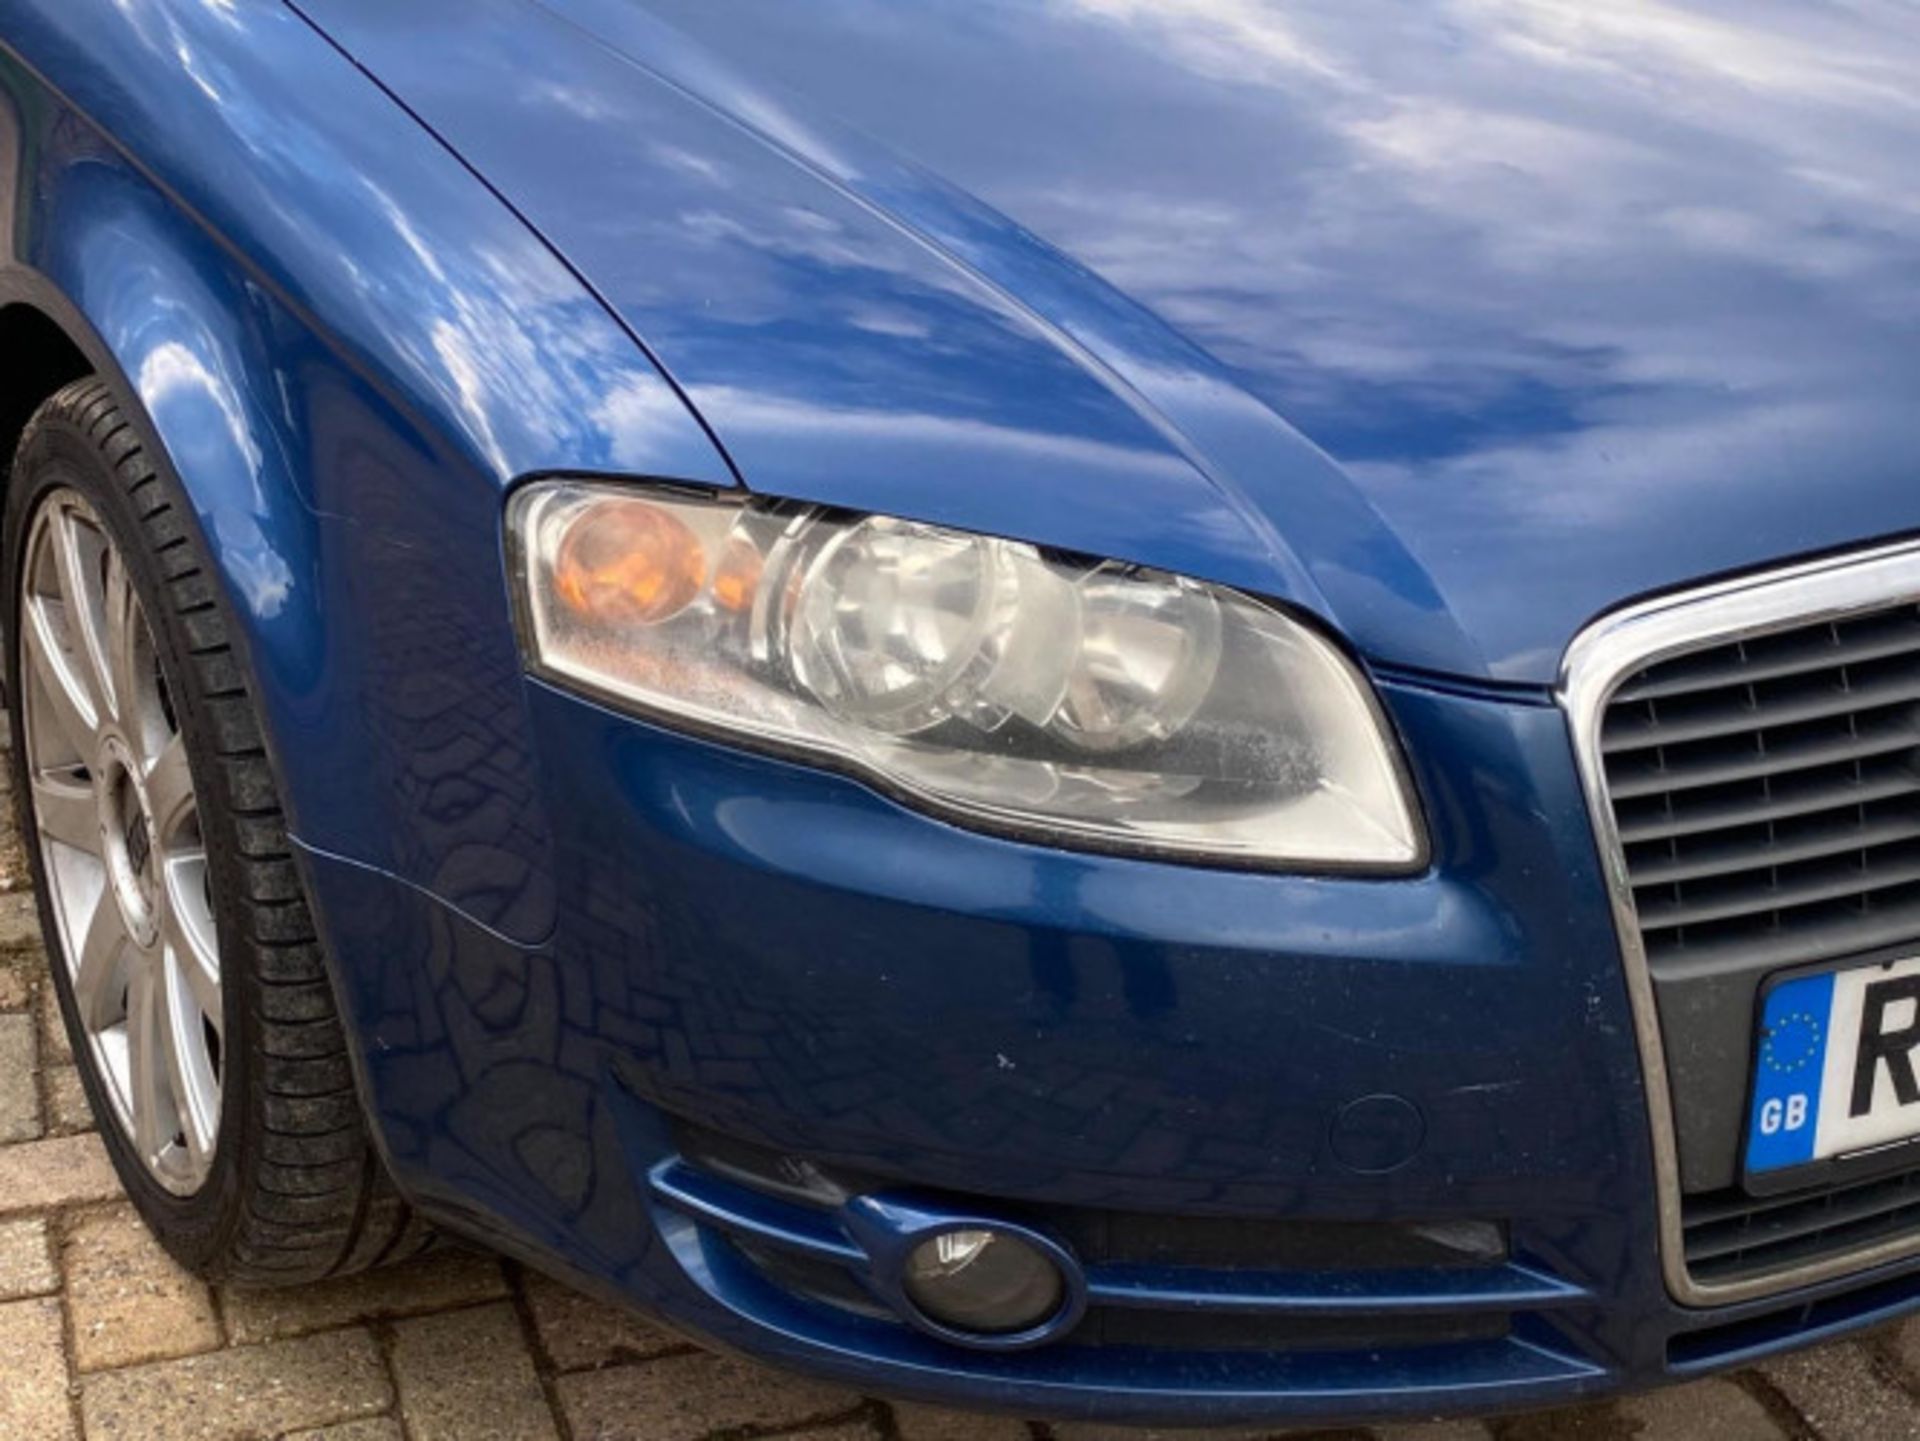 AUDI A4 AVANT 1.9 TDI SE 5DR ESTATE - RARE AND RELIABLE LUXURY WAGON >>--NO VAT ON HAMMER--<< - Image 85 of 97